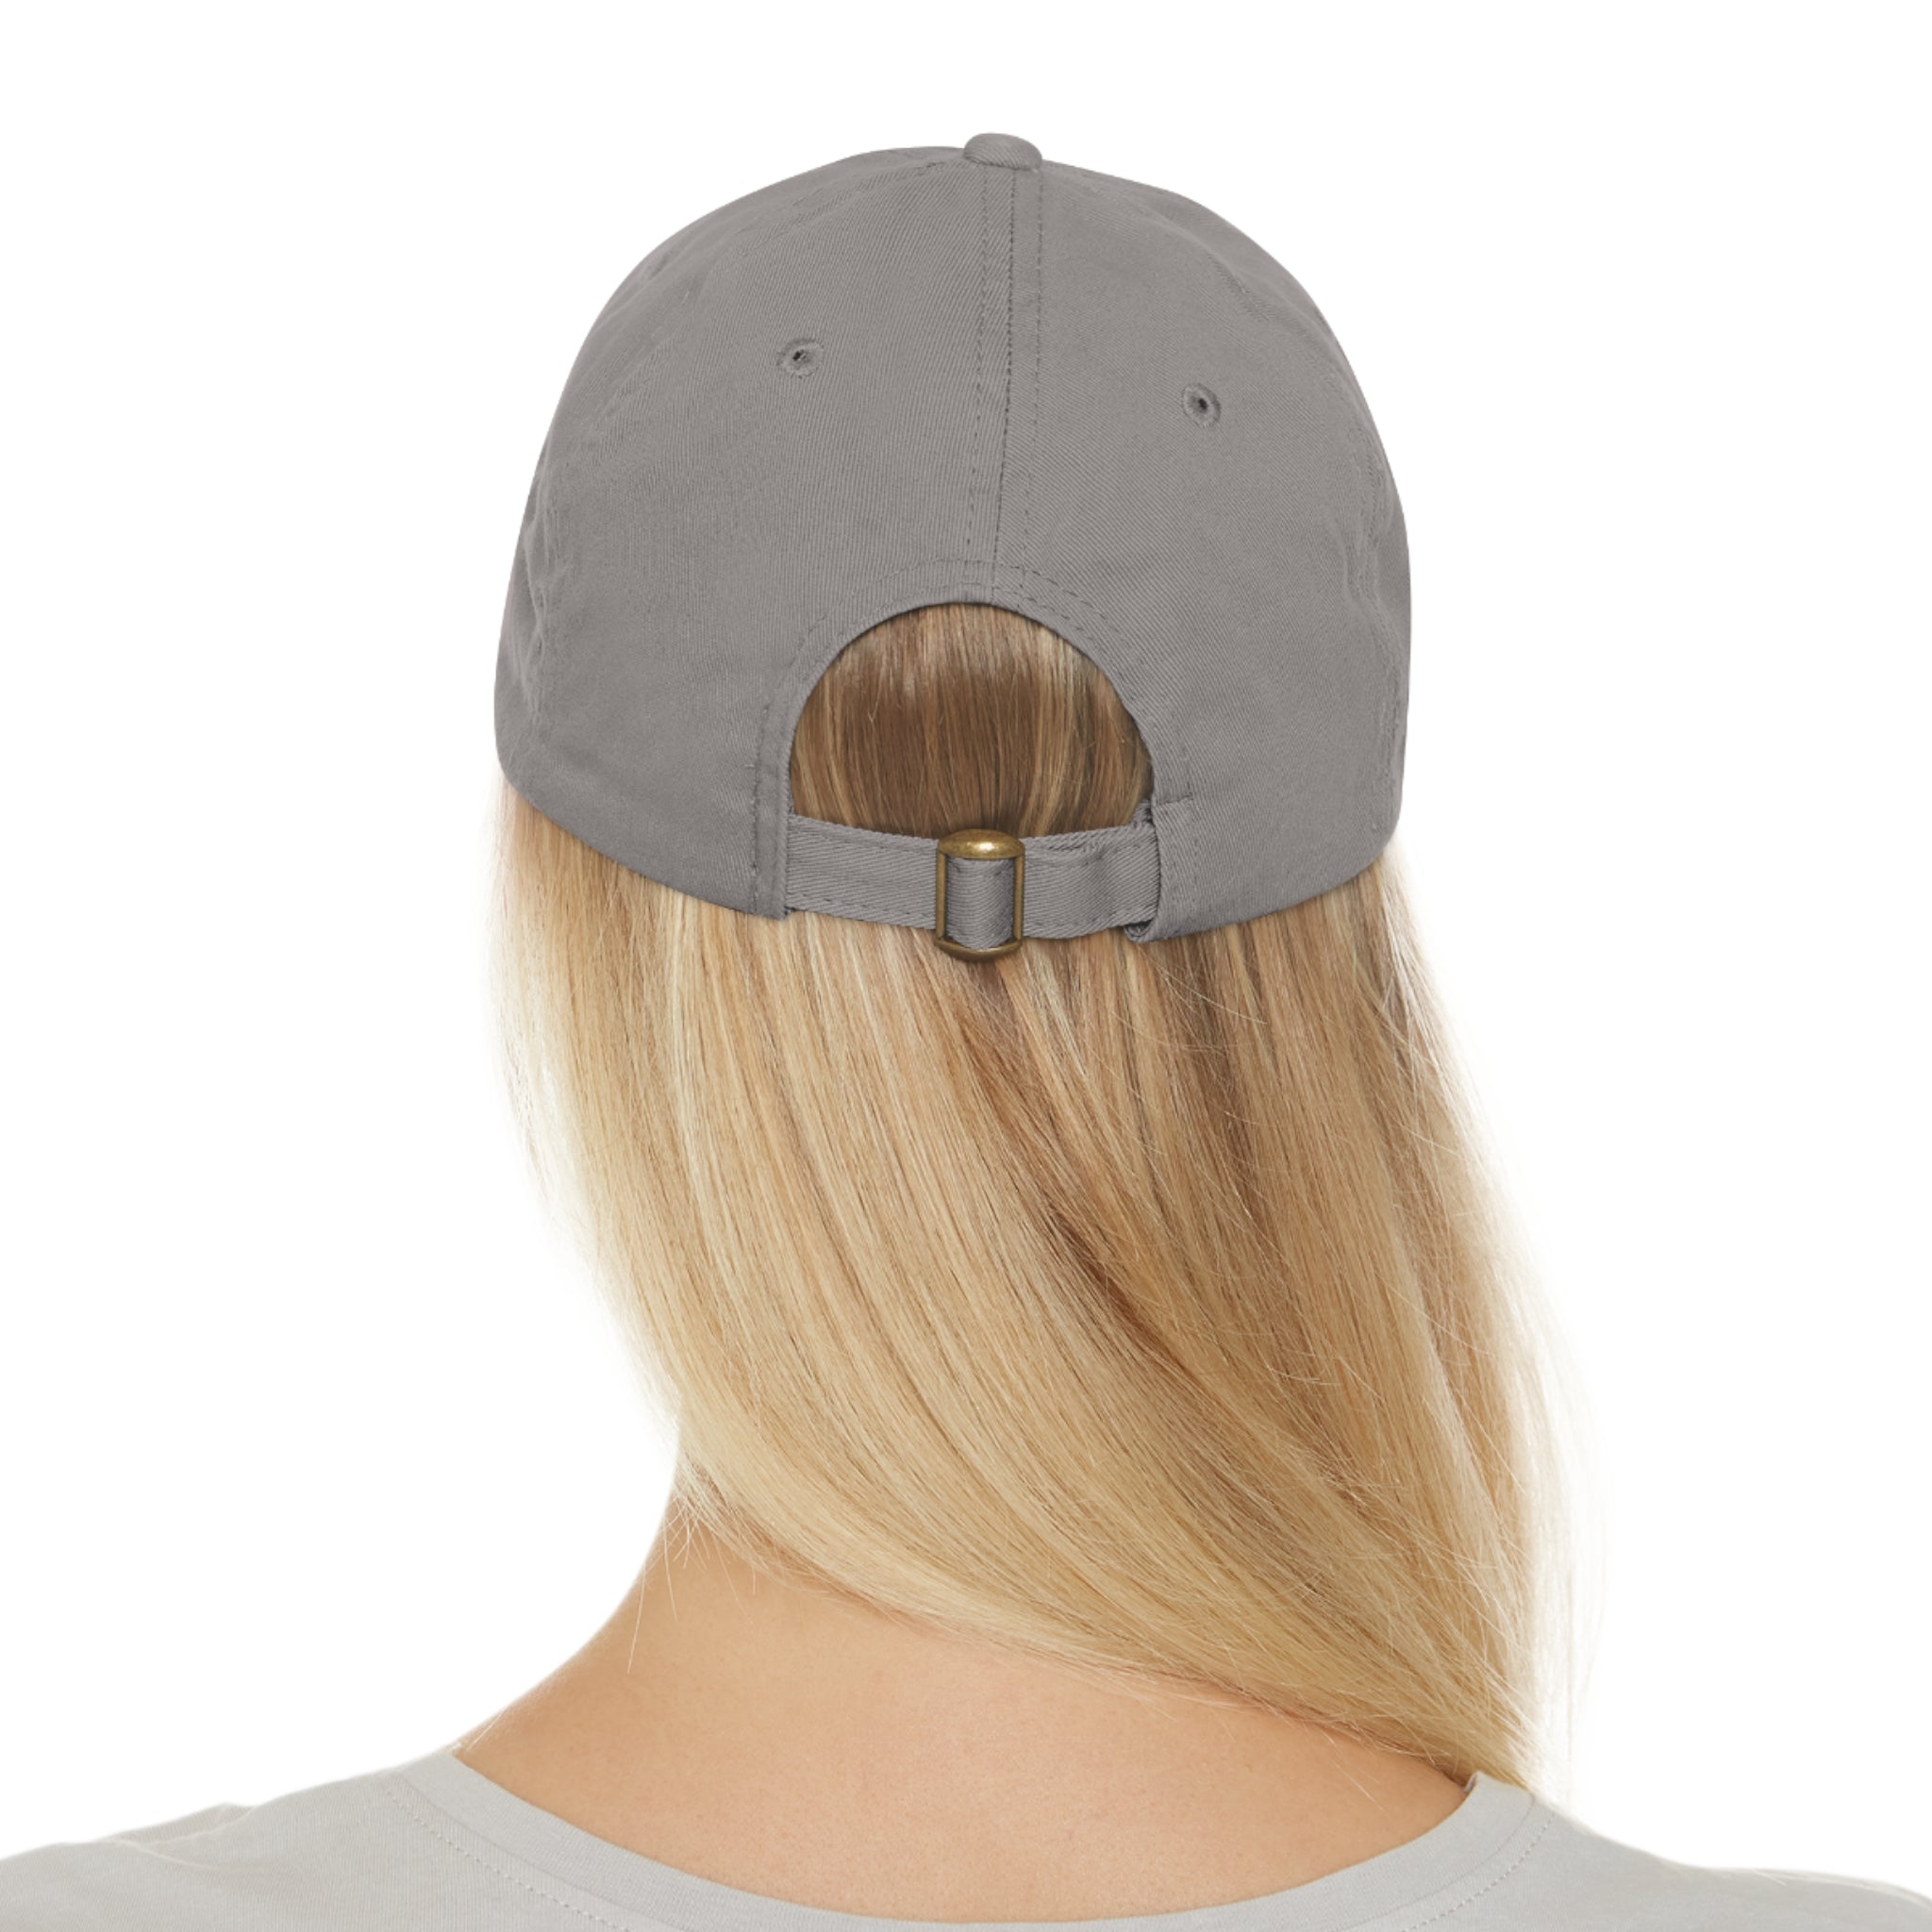 Apollo Moda Grey Dad Hat with Leather Patch (Rectangle)